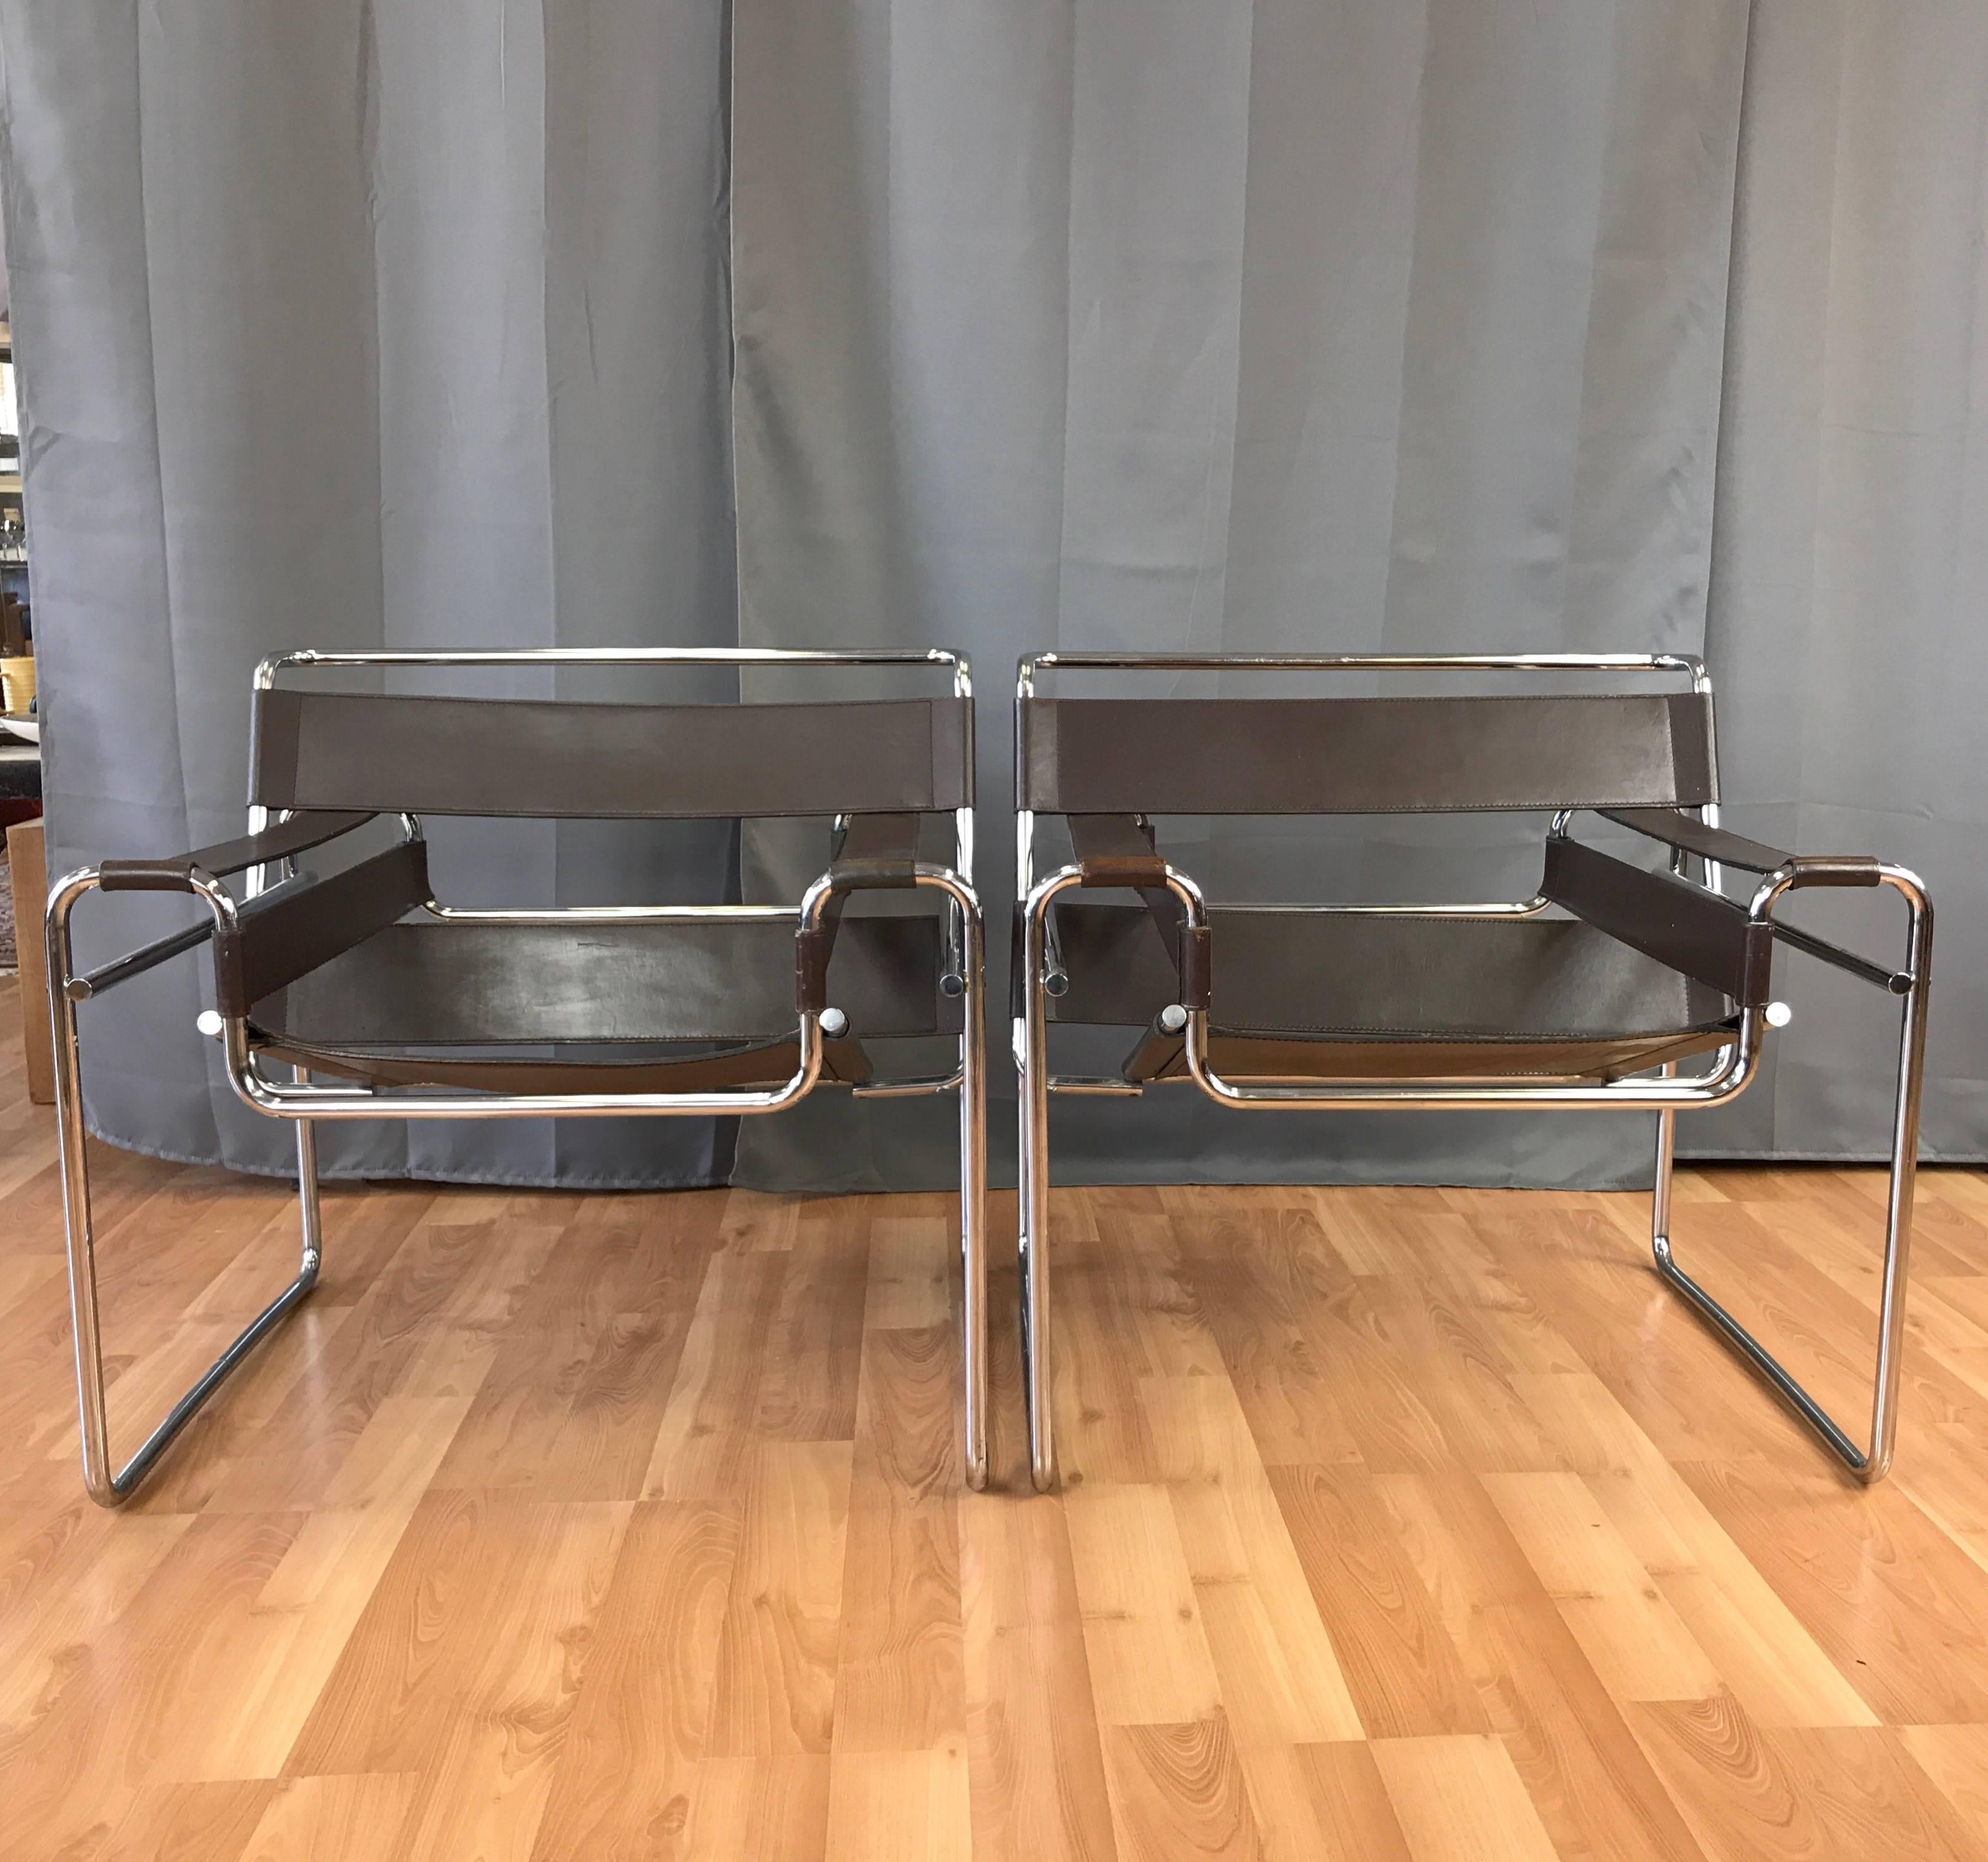 A pair of authentic 1968 Model B3 “Wassily” chairs designed by Marcel Breuer and produced by Gavina for Knoll International.

Designed in 1925, the B3 remains a timeless example of Bauhaus luminary Breuer’s revolutionary efforts to reconcile art